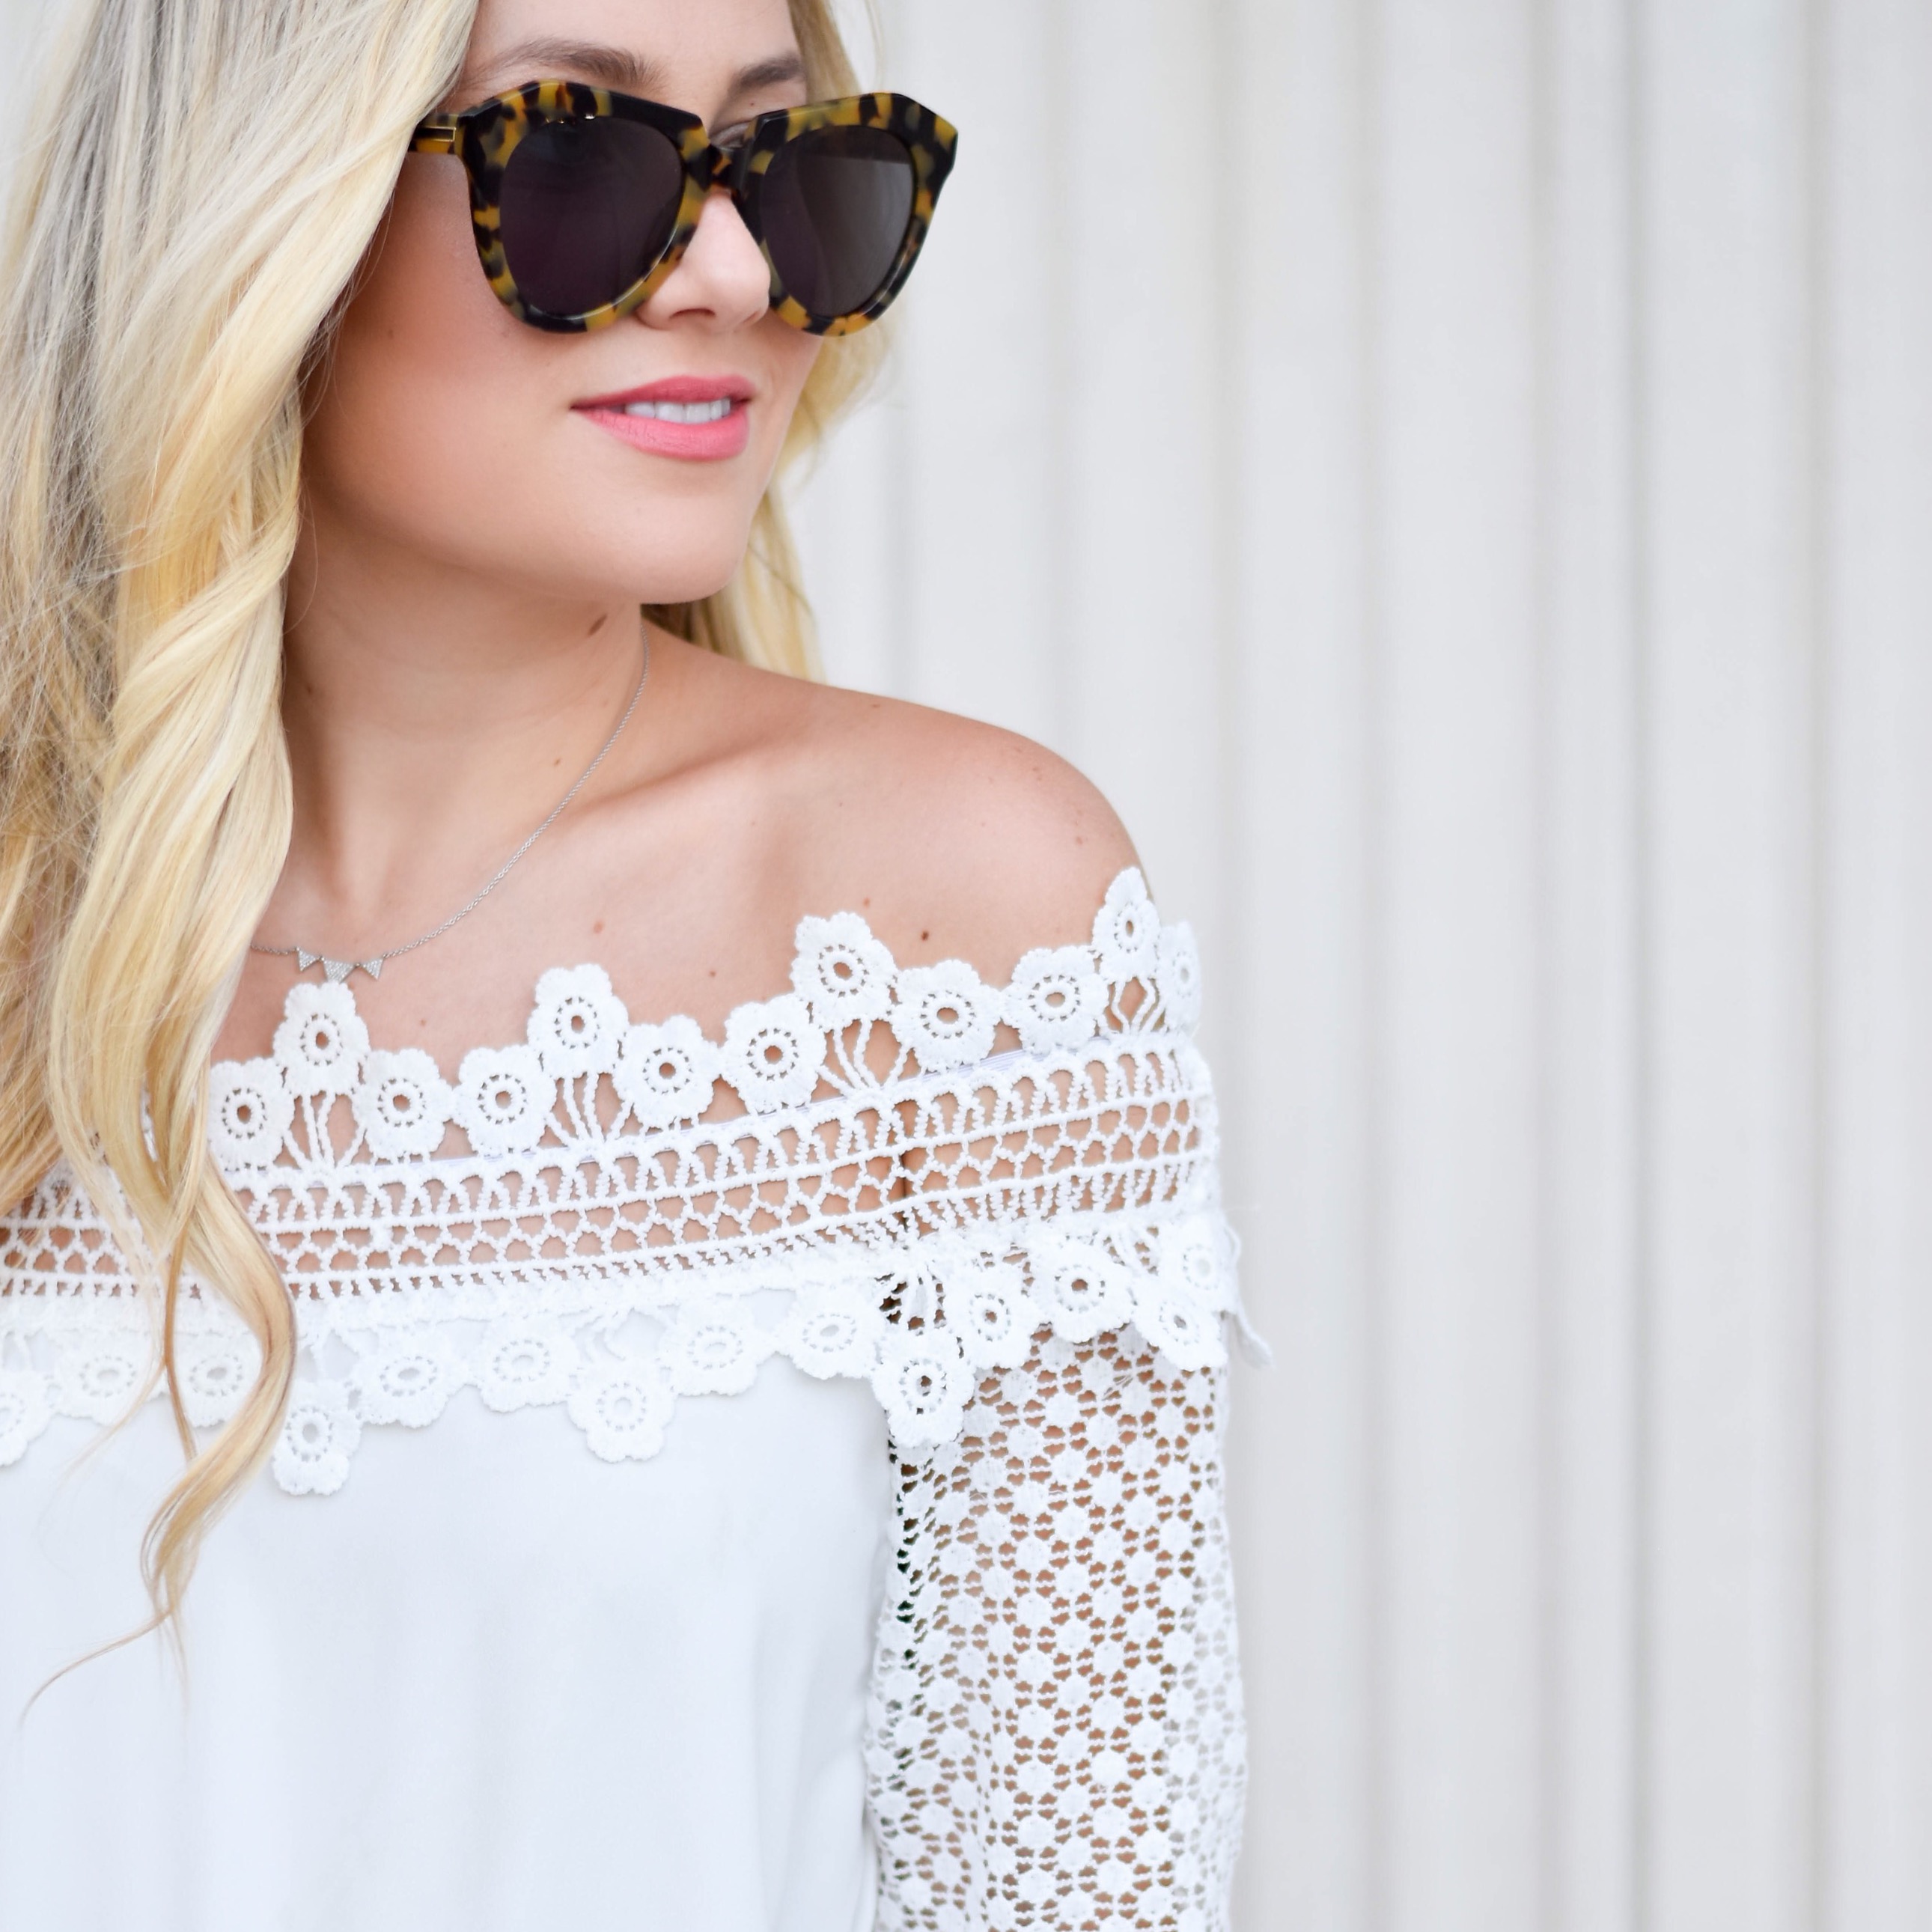 With Top, White lace top, off the shoulder top, Lace off the shoulder top, Karen Walker Sunglasses, Nordstrom Karen Walker, Colour Pop Cosmetics